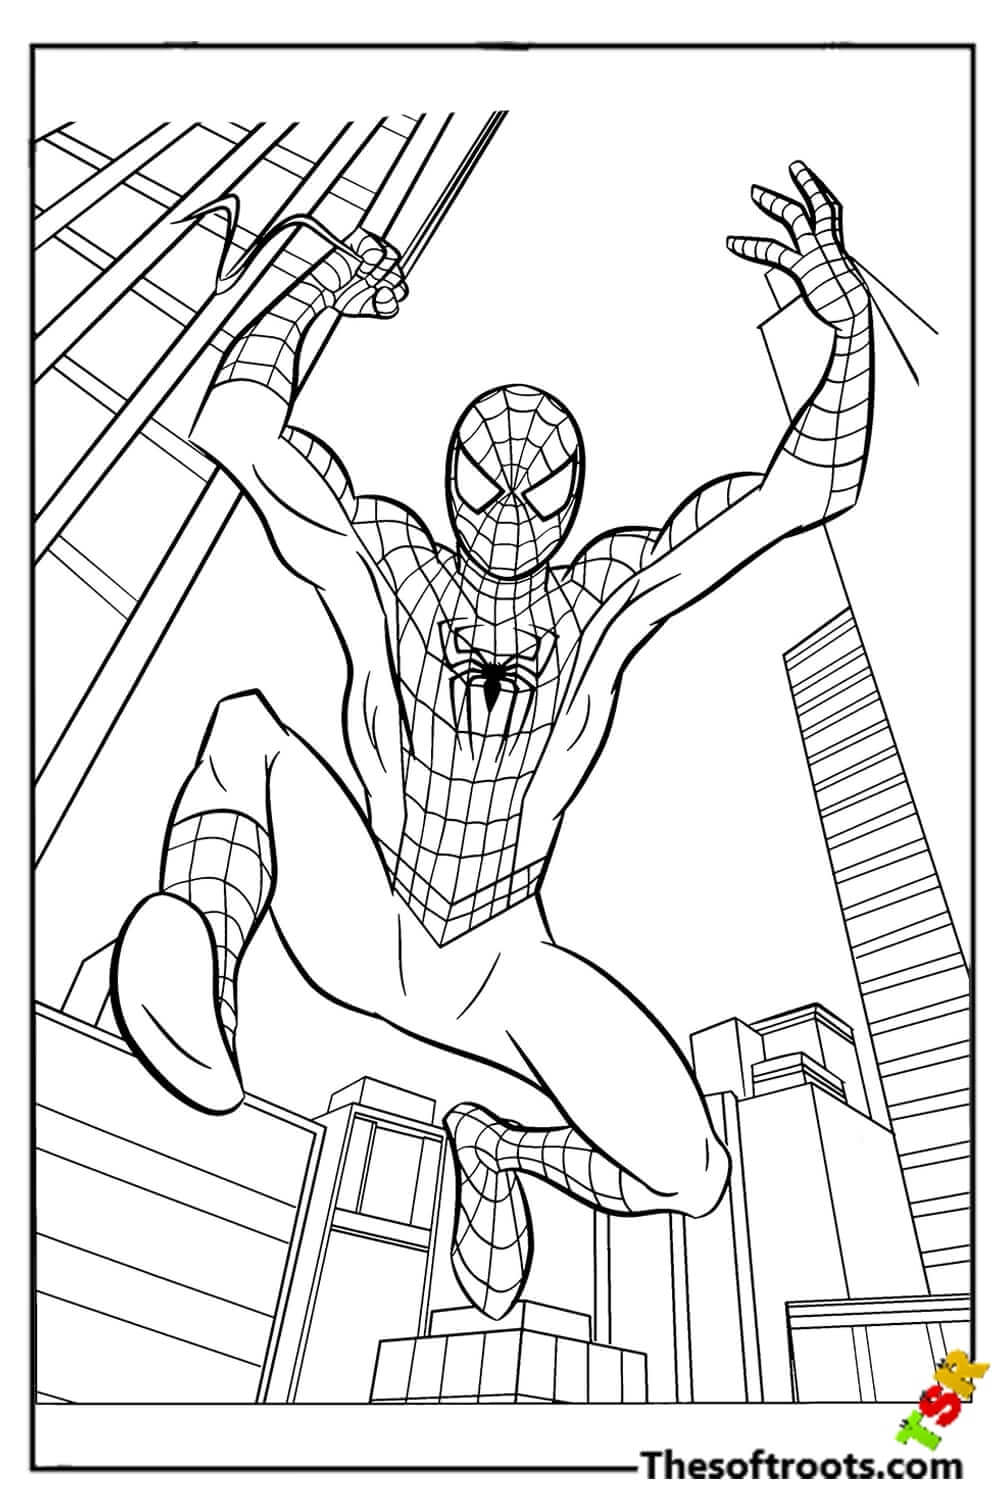 Heroic Spiderman coloring pages